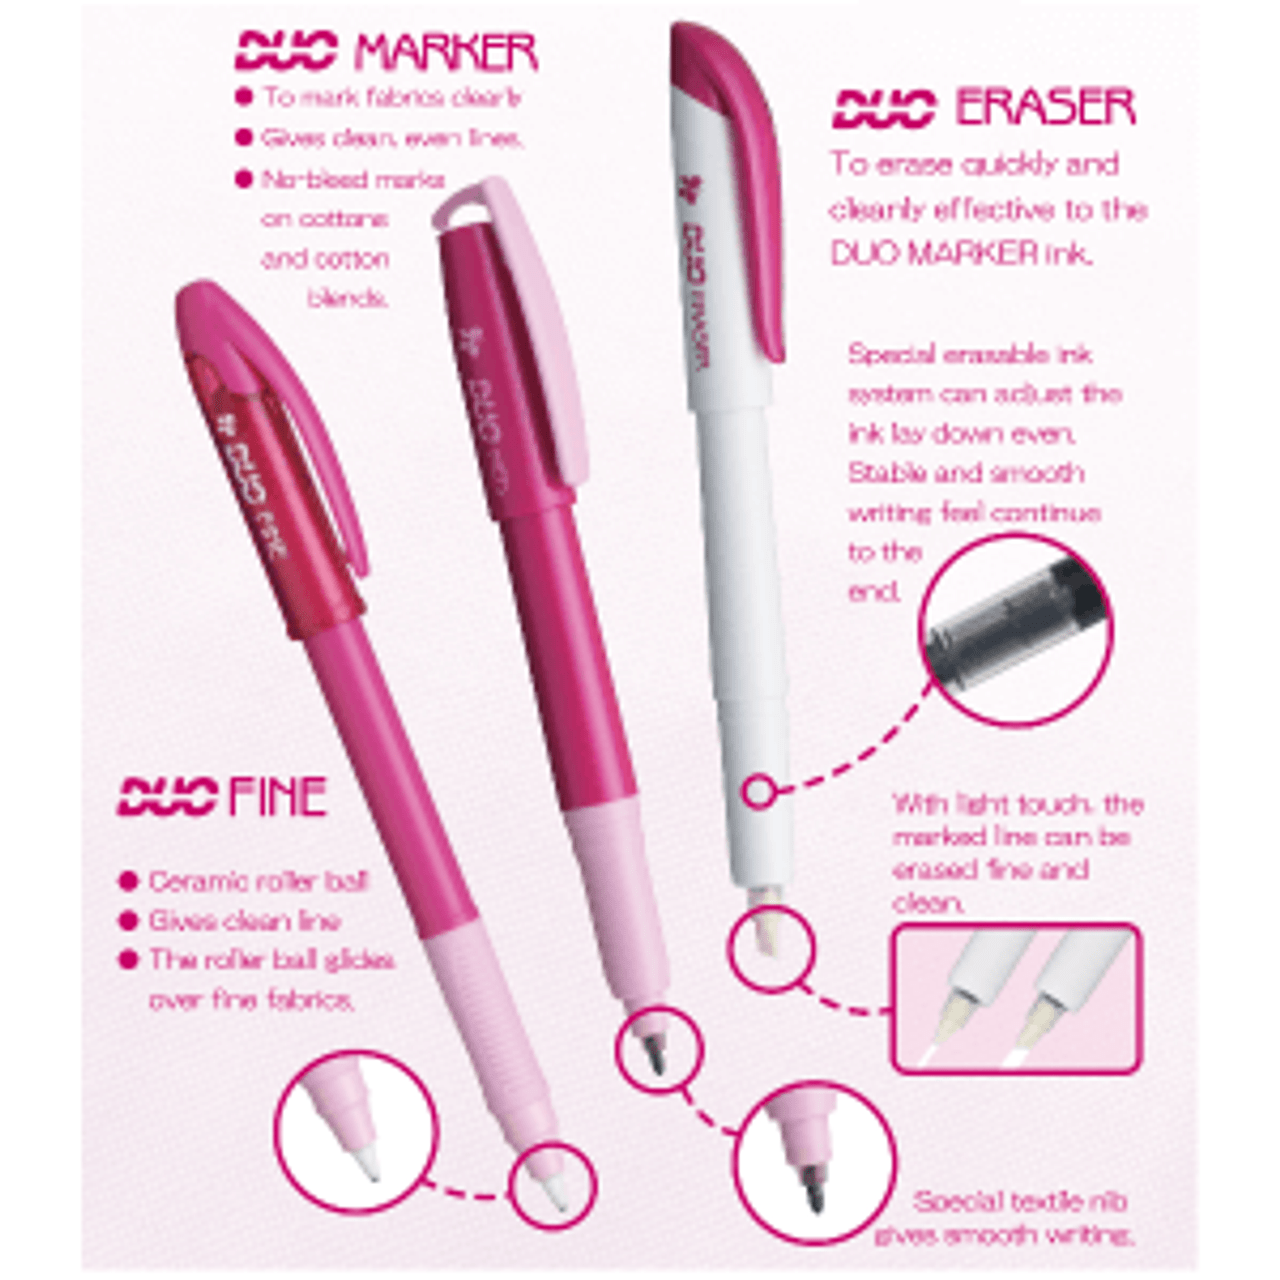 Sewline Duo Marker and Eraser specification illustration